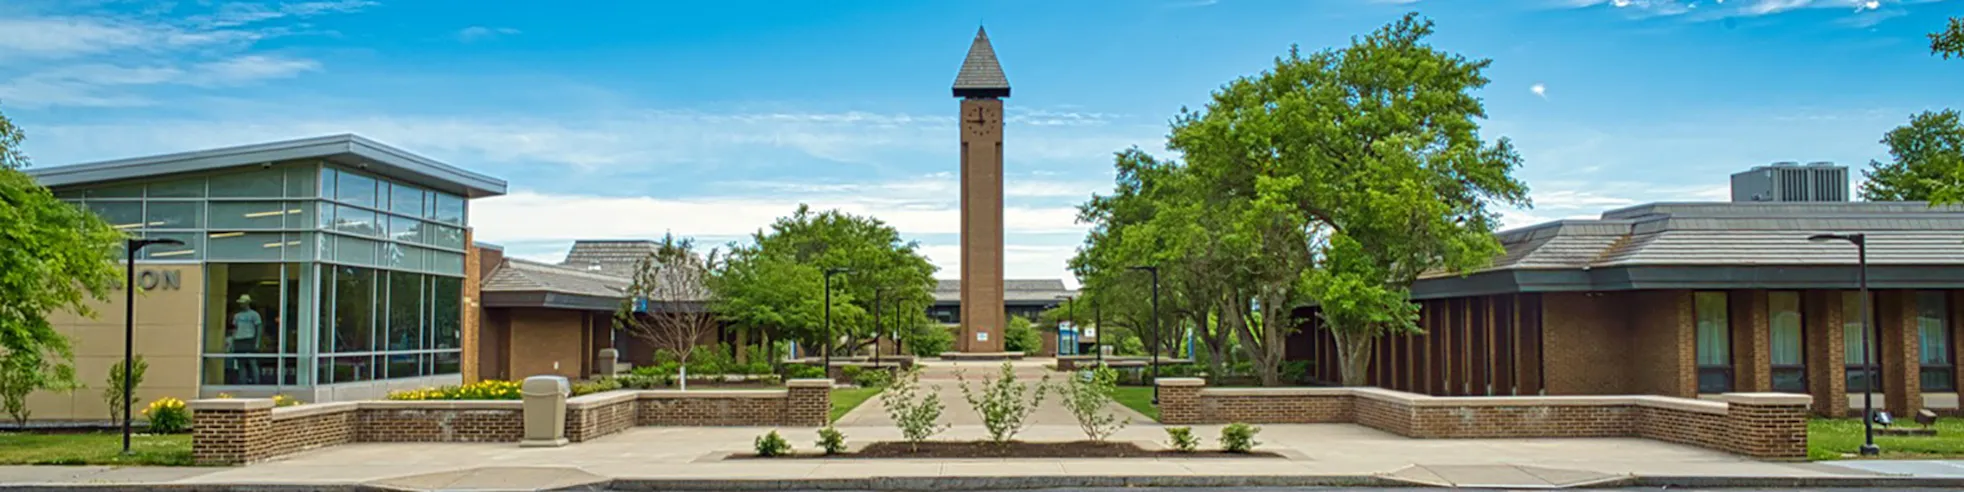 FMCC Campus showing the central clock tower